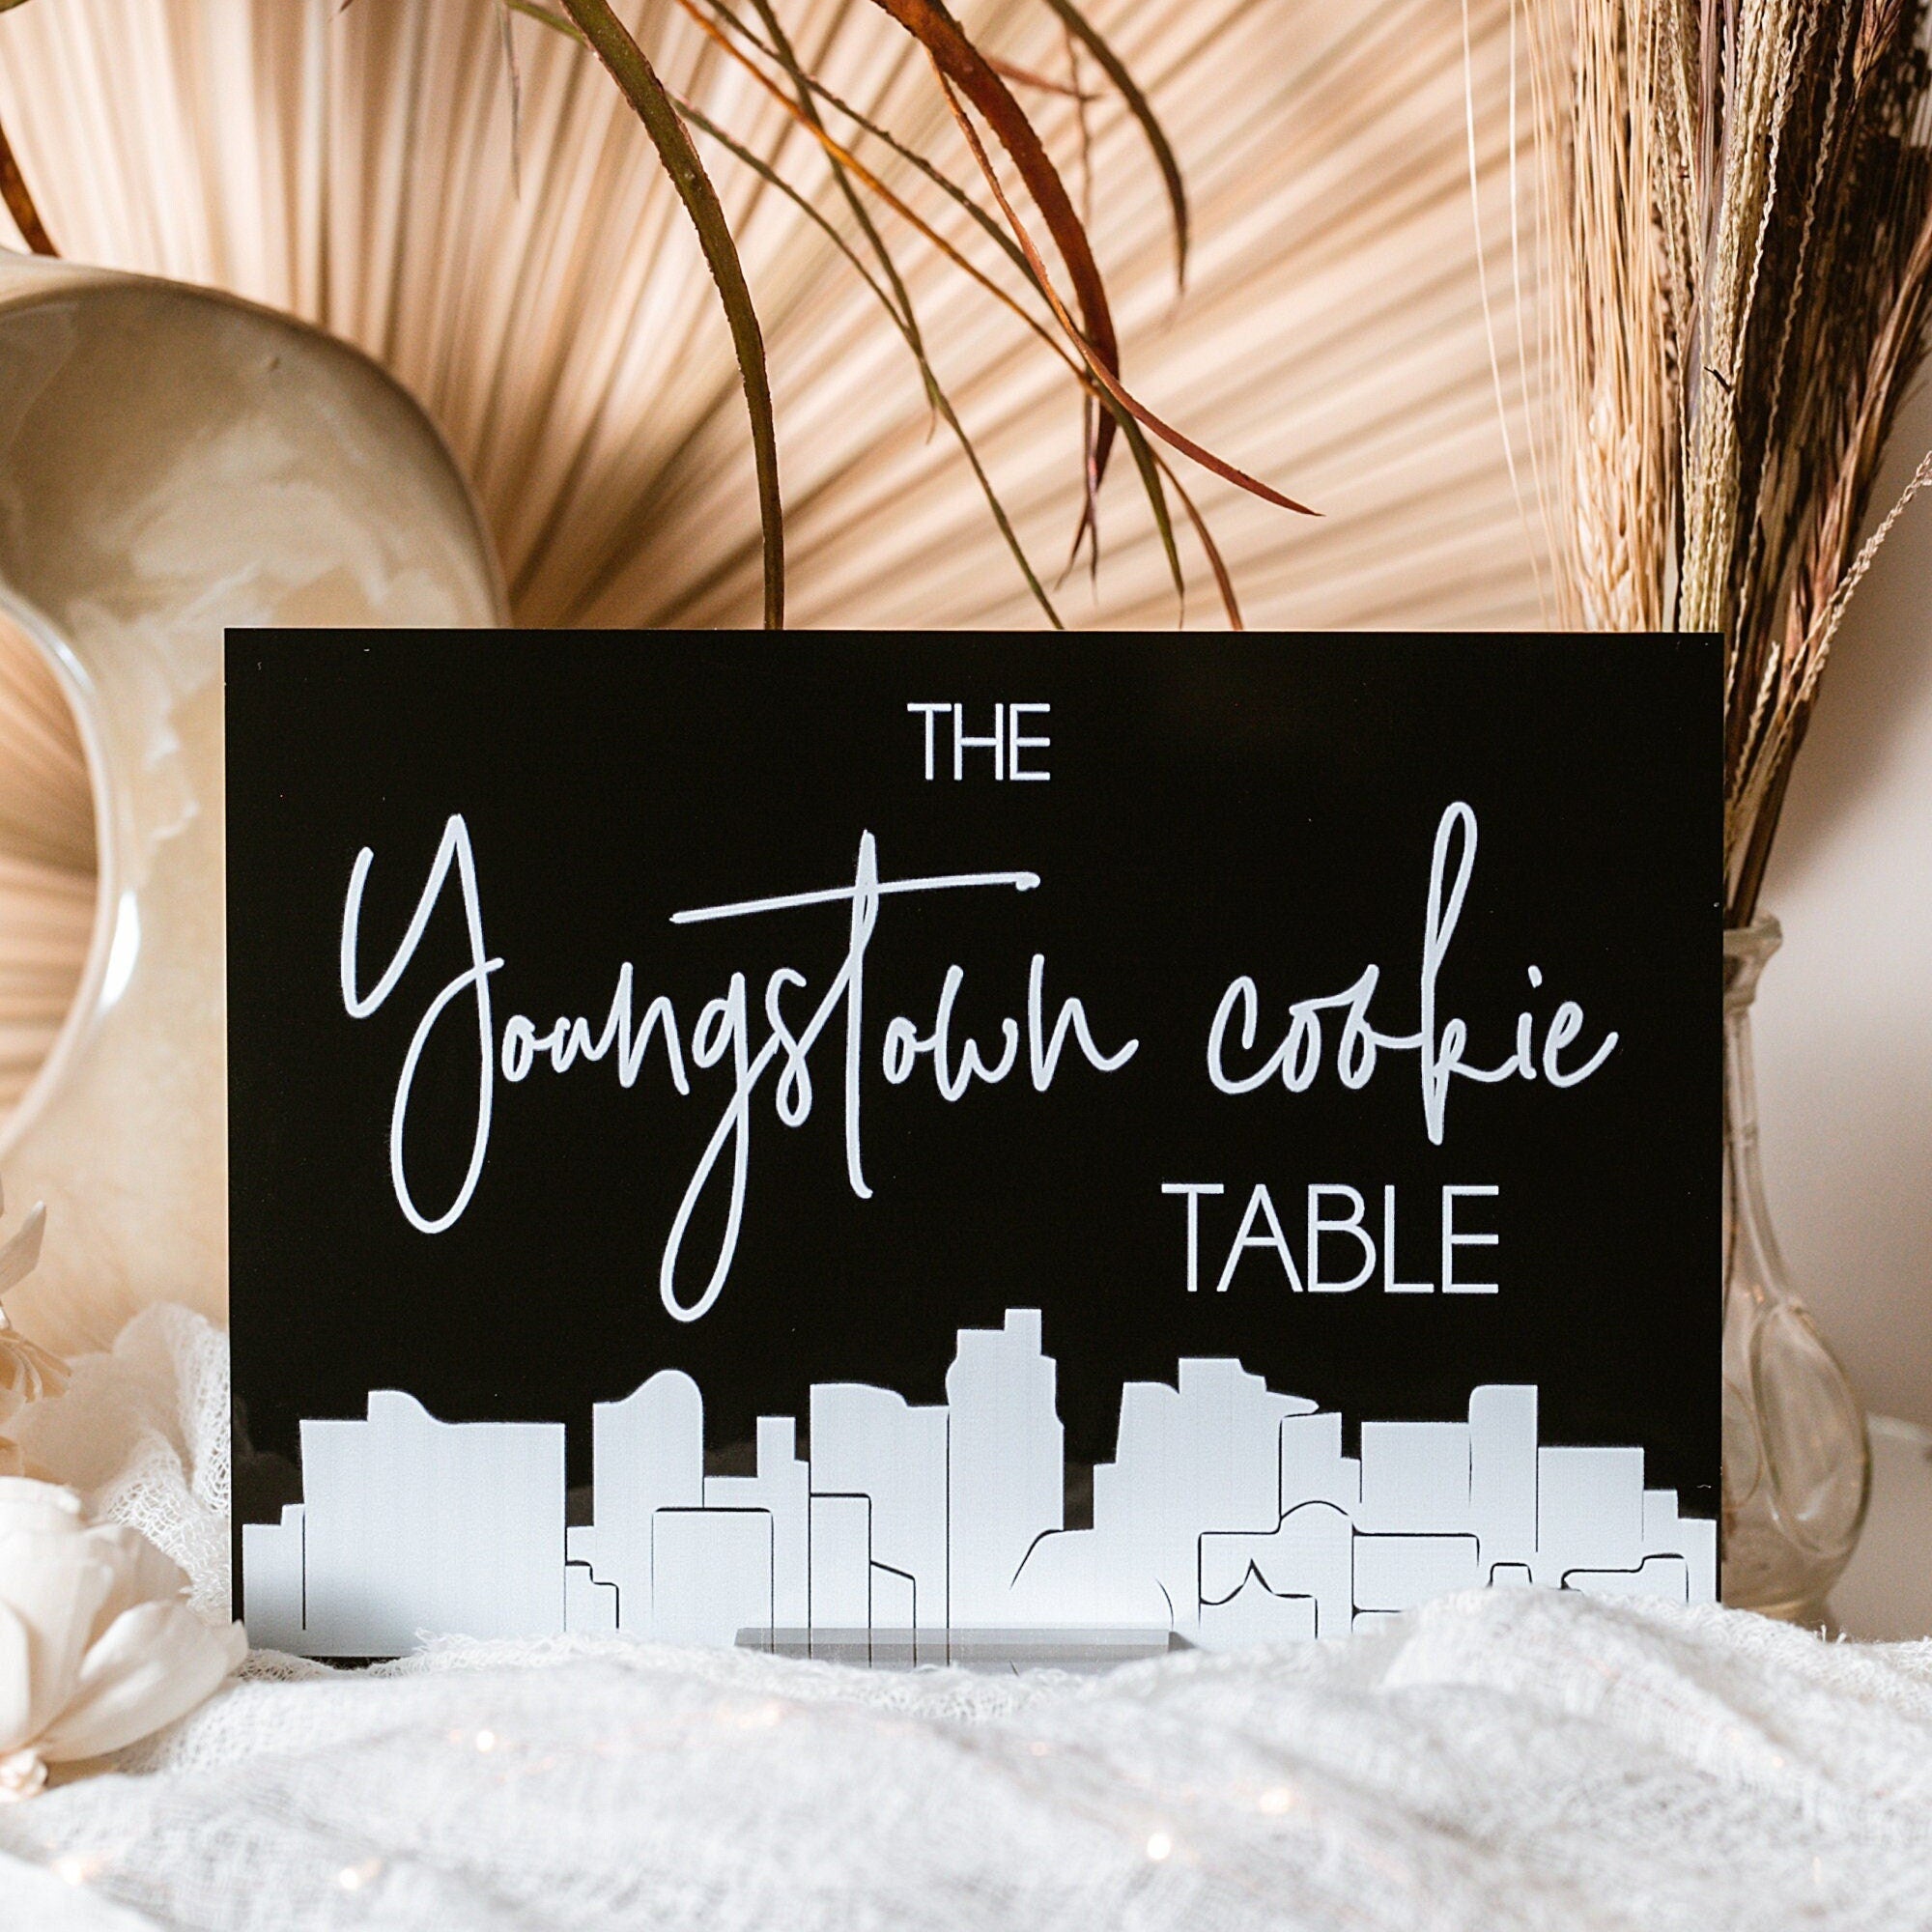 Youngstown Cookie Table S3-AS52